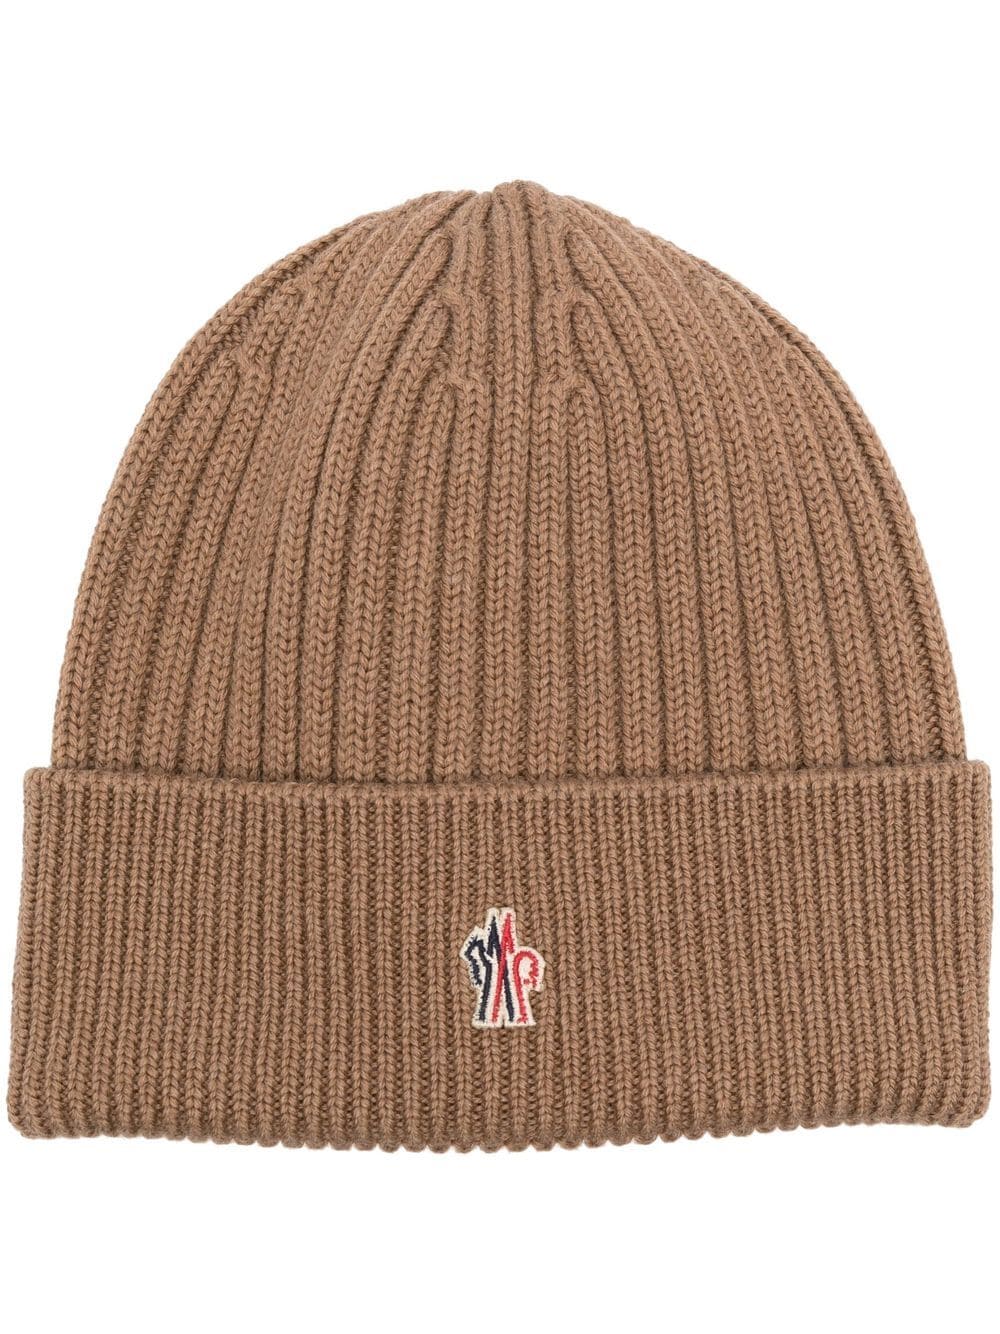 Moncler Grenoble logo-embroidered ribbed-knit beanie - Braun